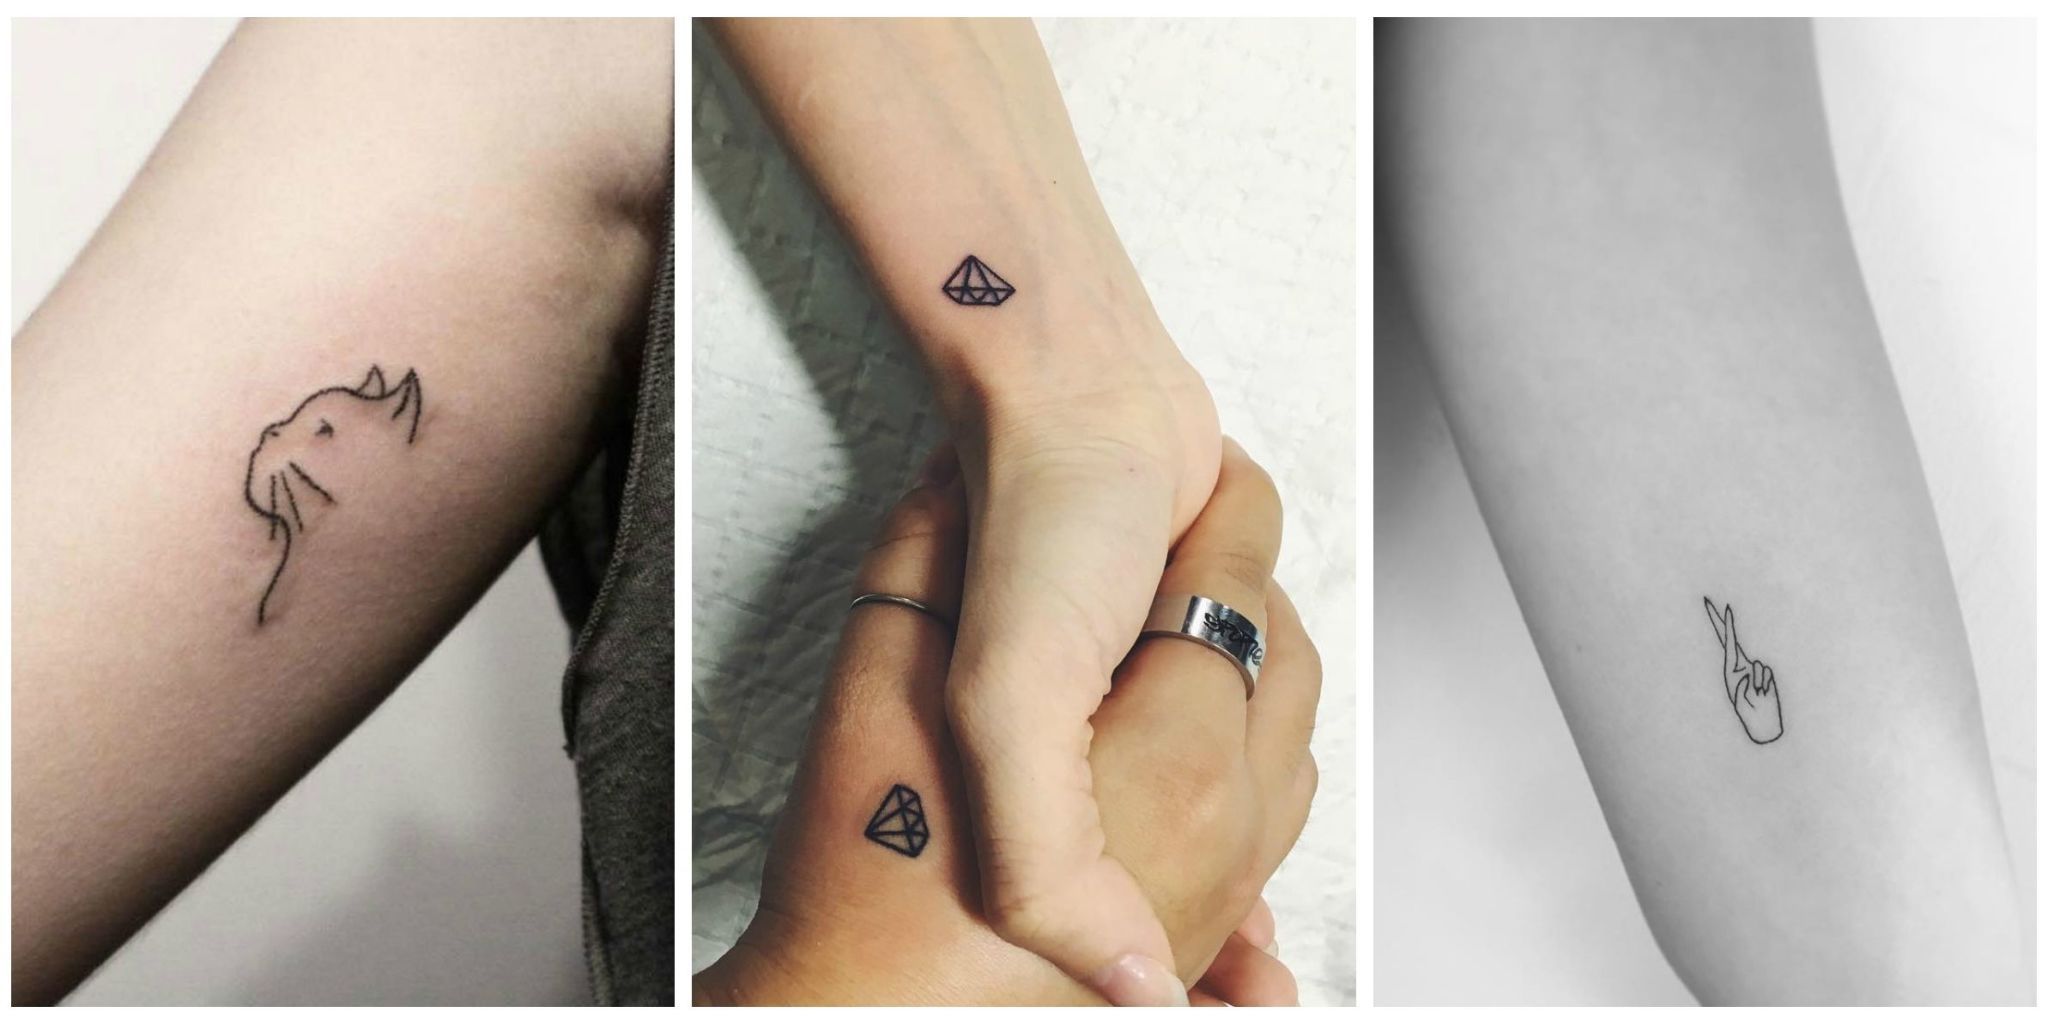 12 Essential Tattoo Styles You Need to Know - 99designs